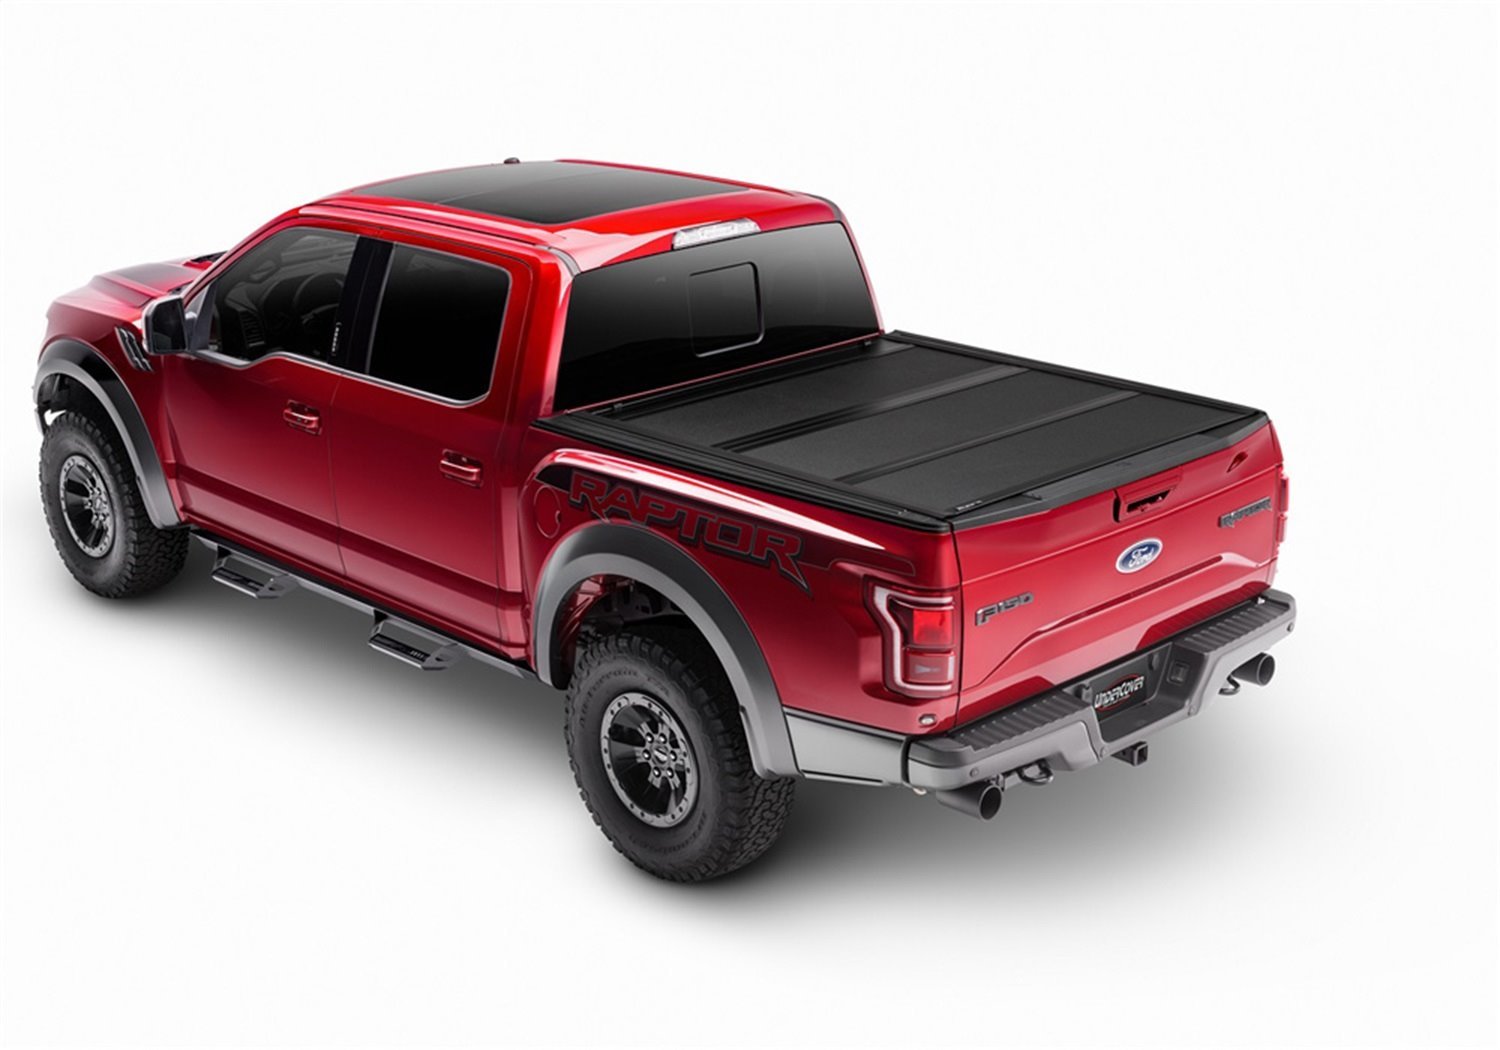 AX42015 Armor Flex Hard Folding Cover, Fits Select Toyota Tacoma 6'Bed Crew w/o Bedside Storage Boxes, Black Textured